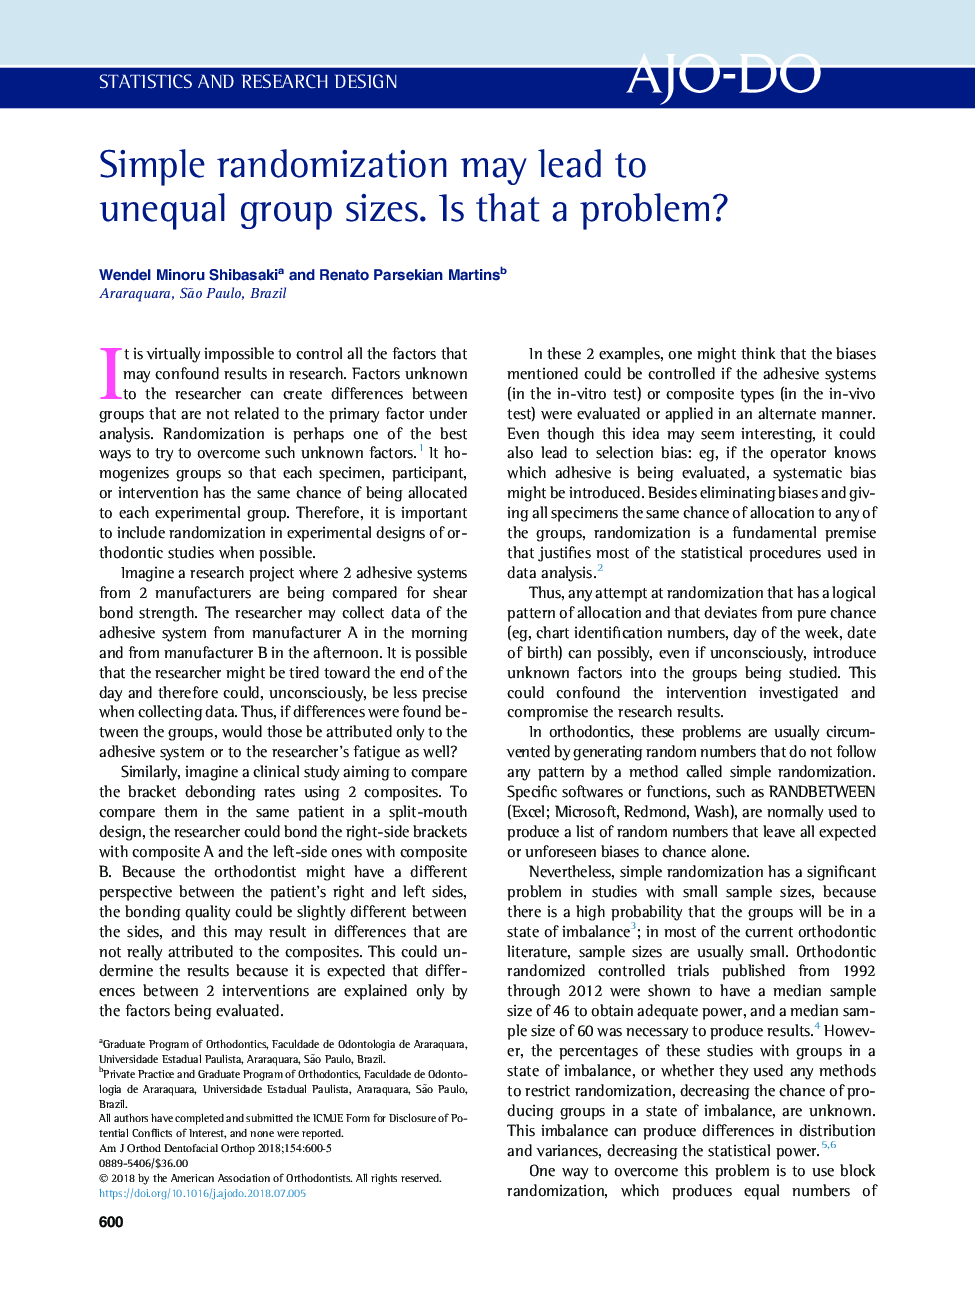 Simple randomization may lead to unequal group sizes. Is that a problem?